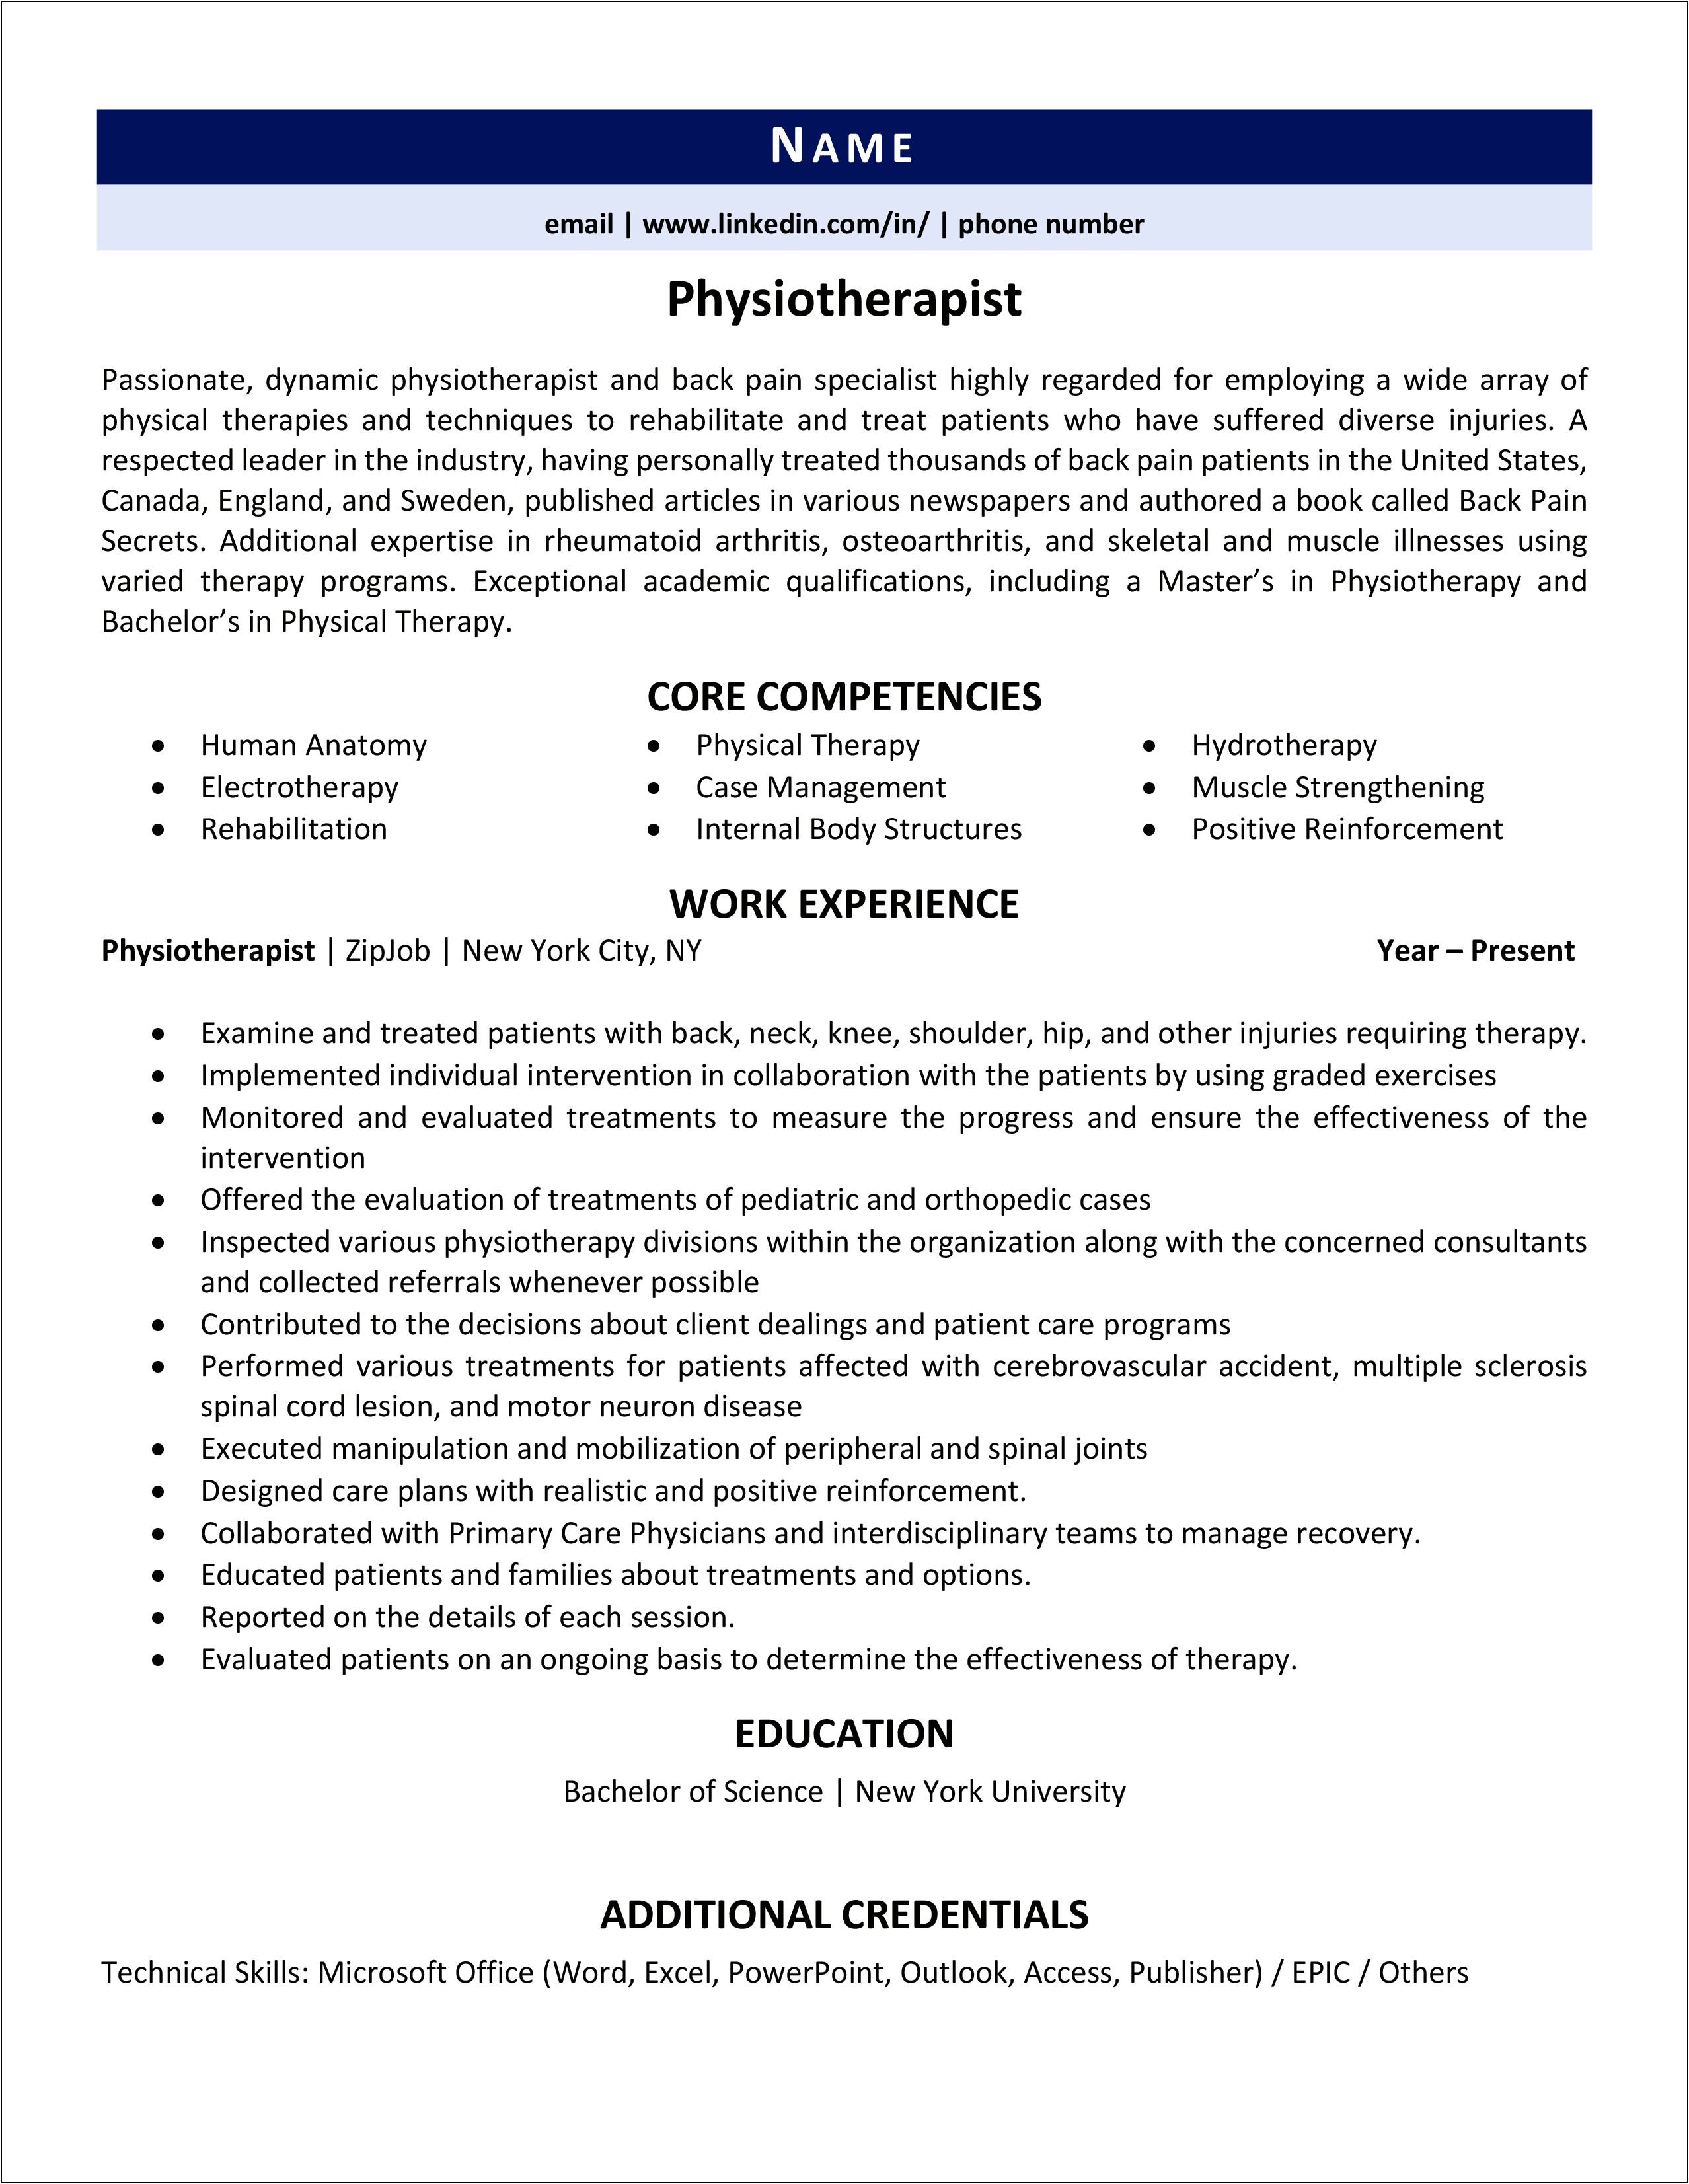 Skills For Physical Therapist For Resume